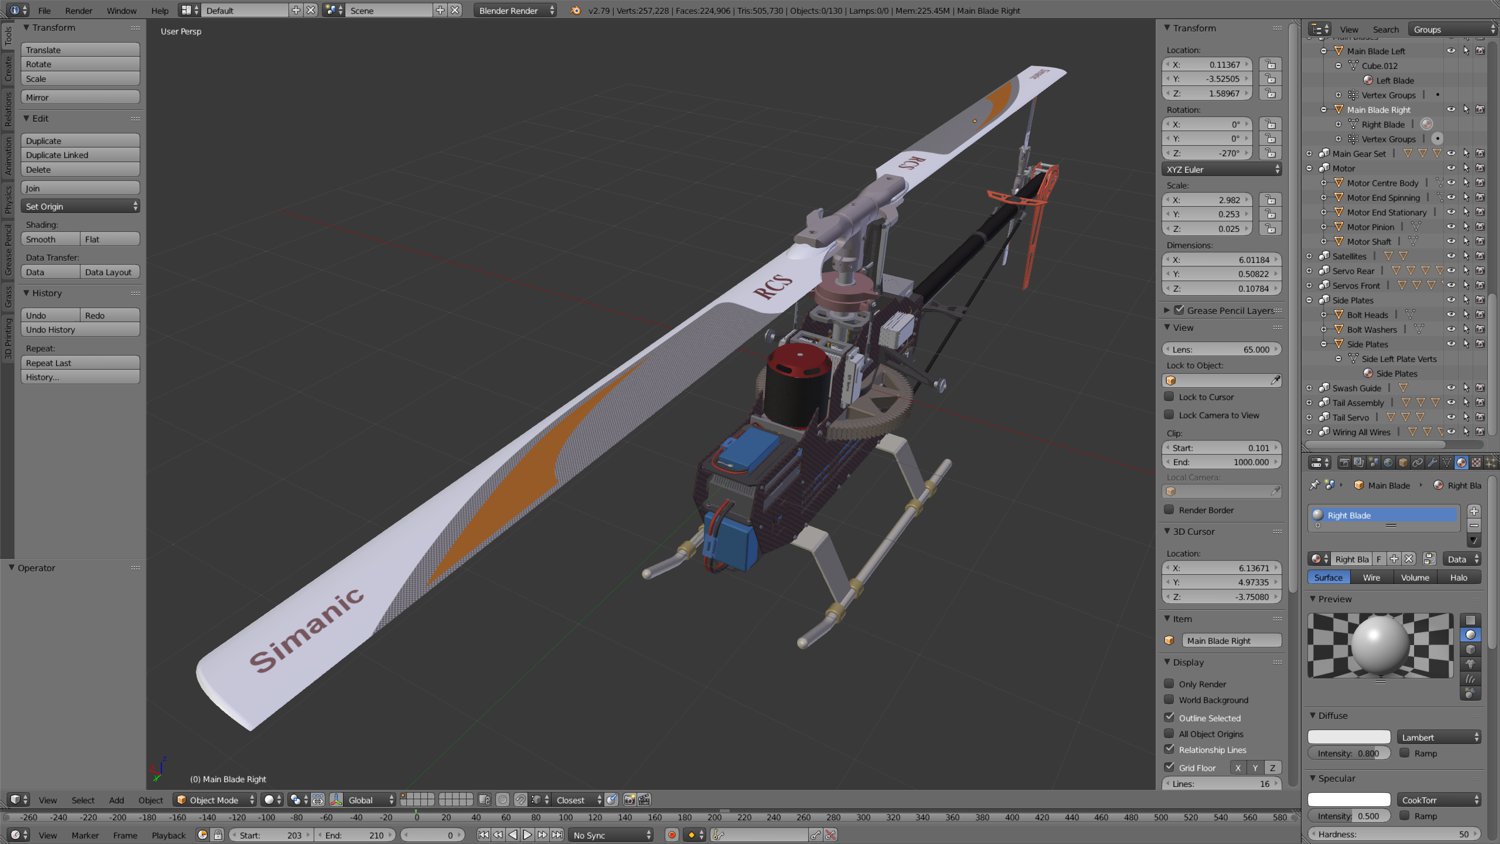 Screenshot of radio control helicopter via Blender's 2.79 user interface - Front side view with canopy off.